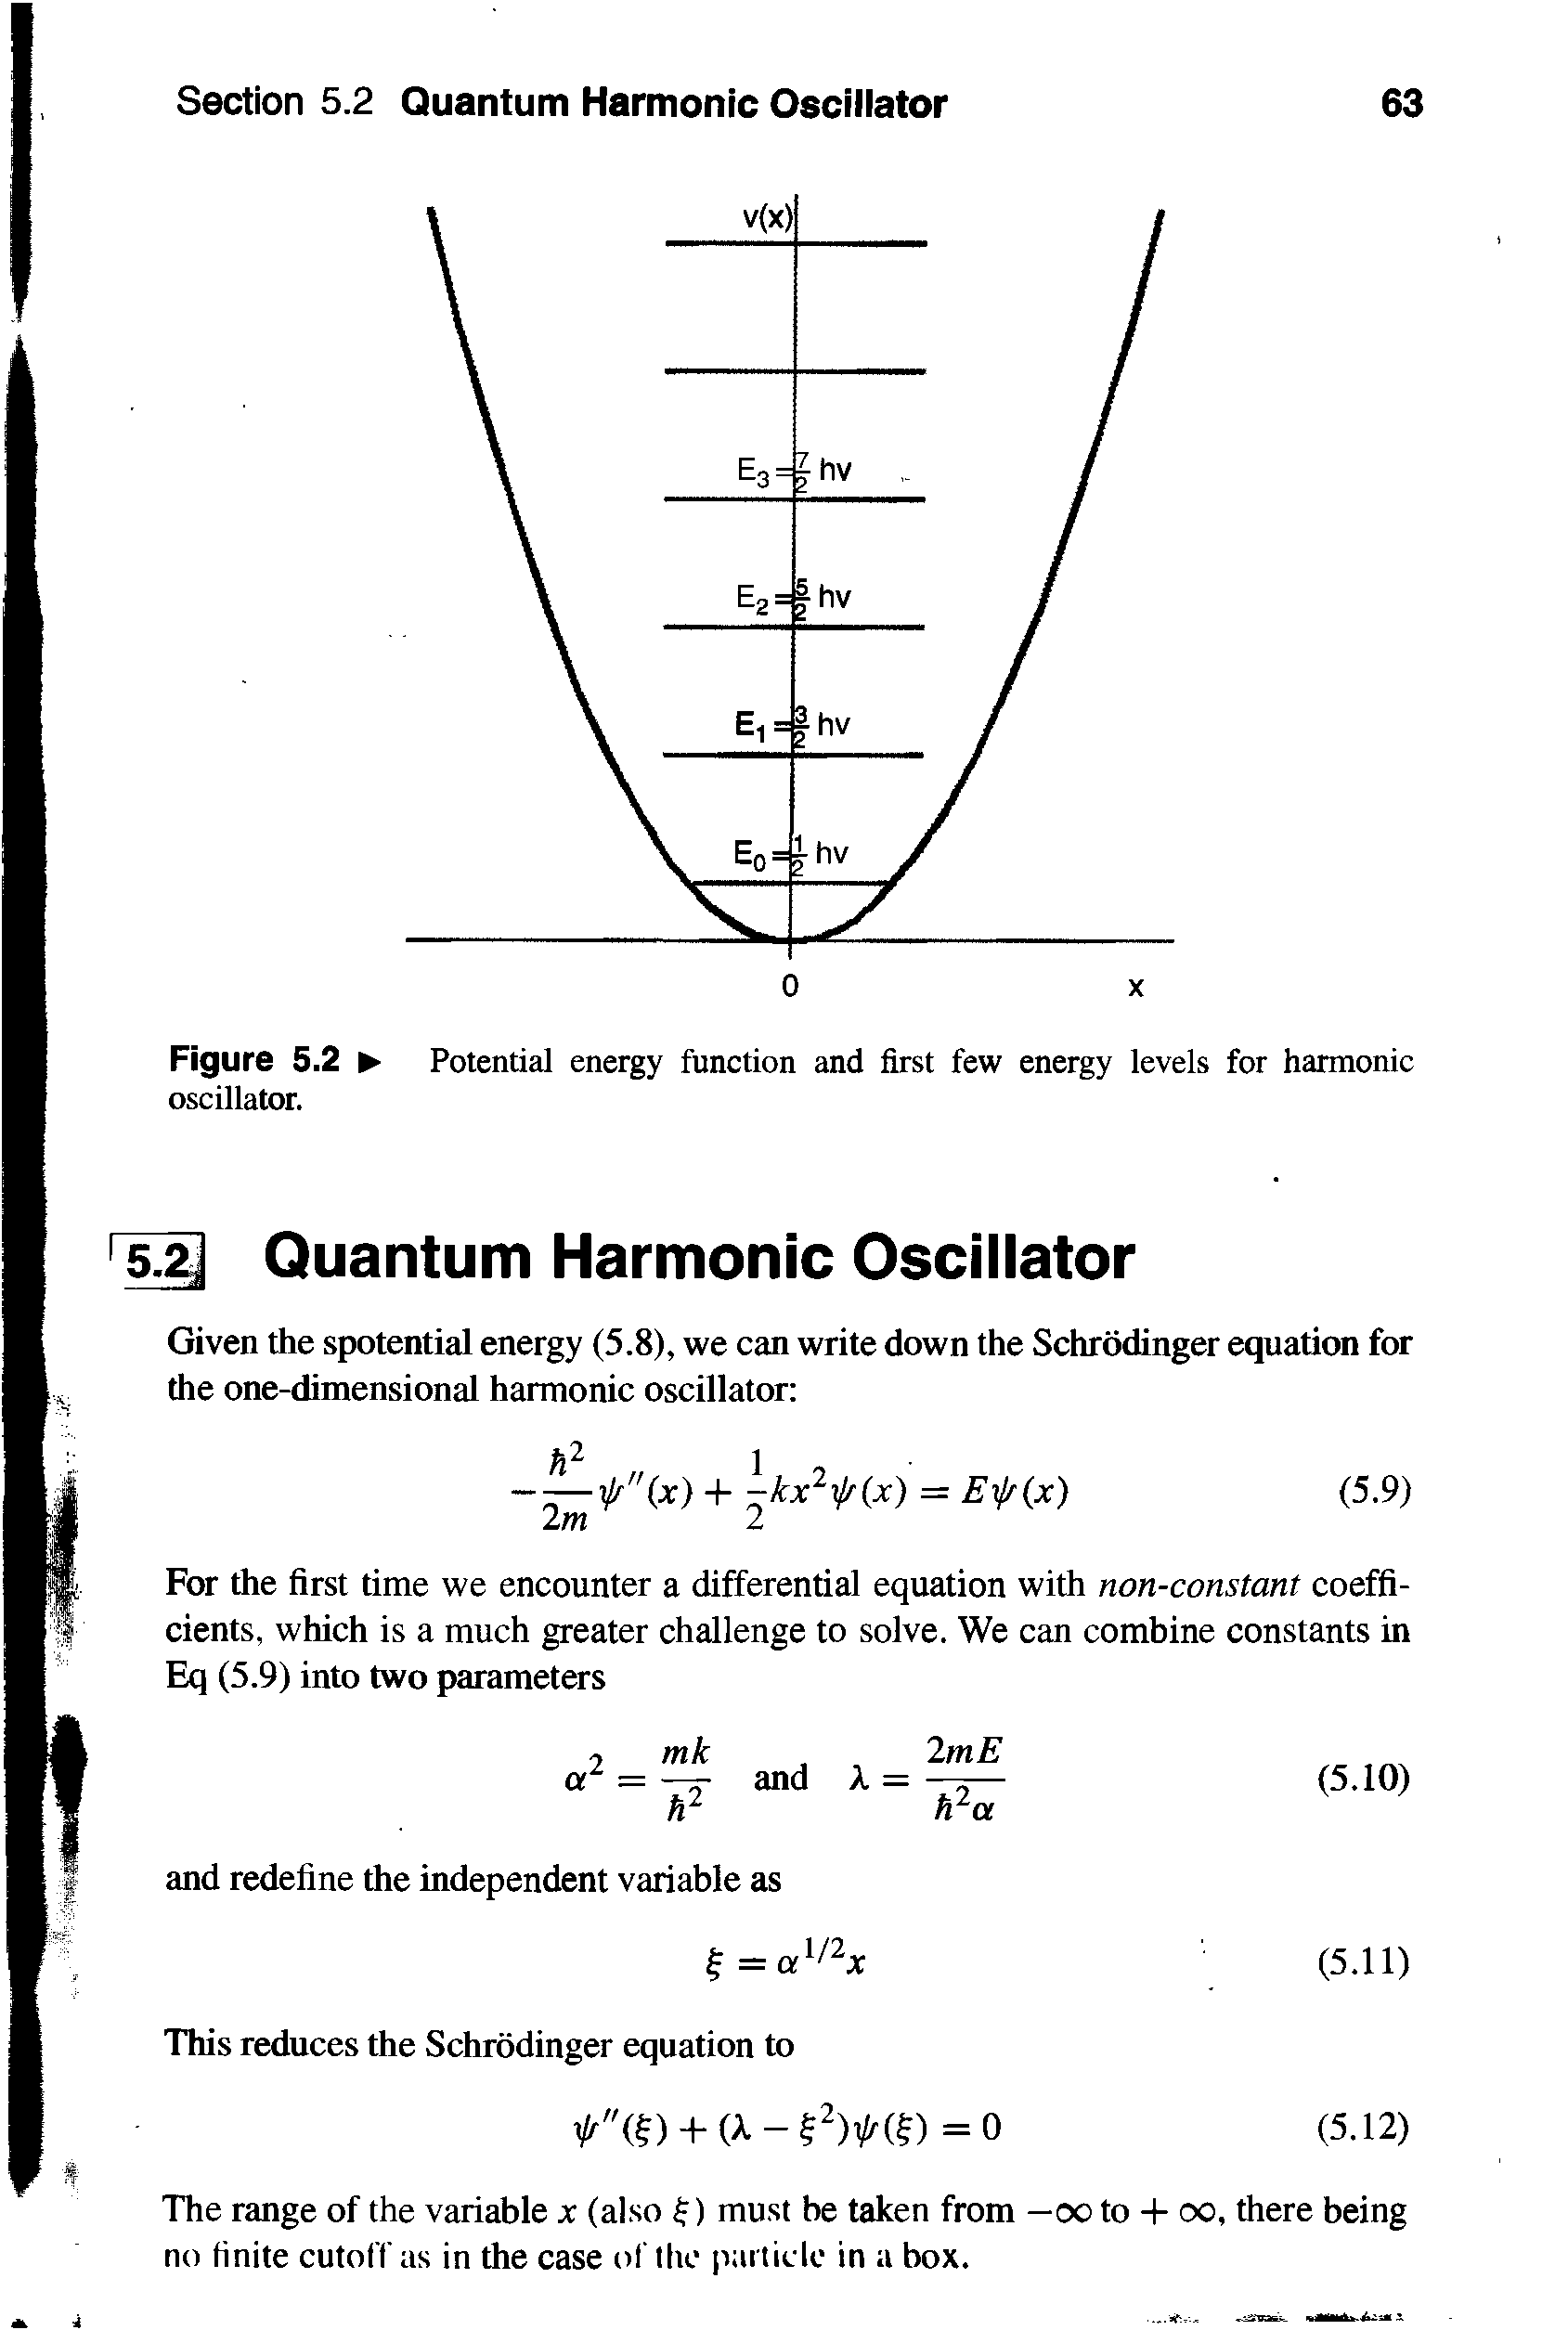 Figure 5.2 Potential energy function and first few energy levels for harmonic oscillator.